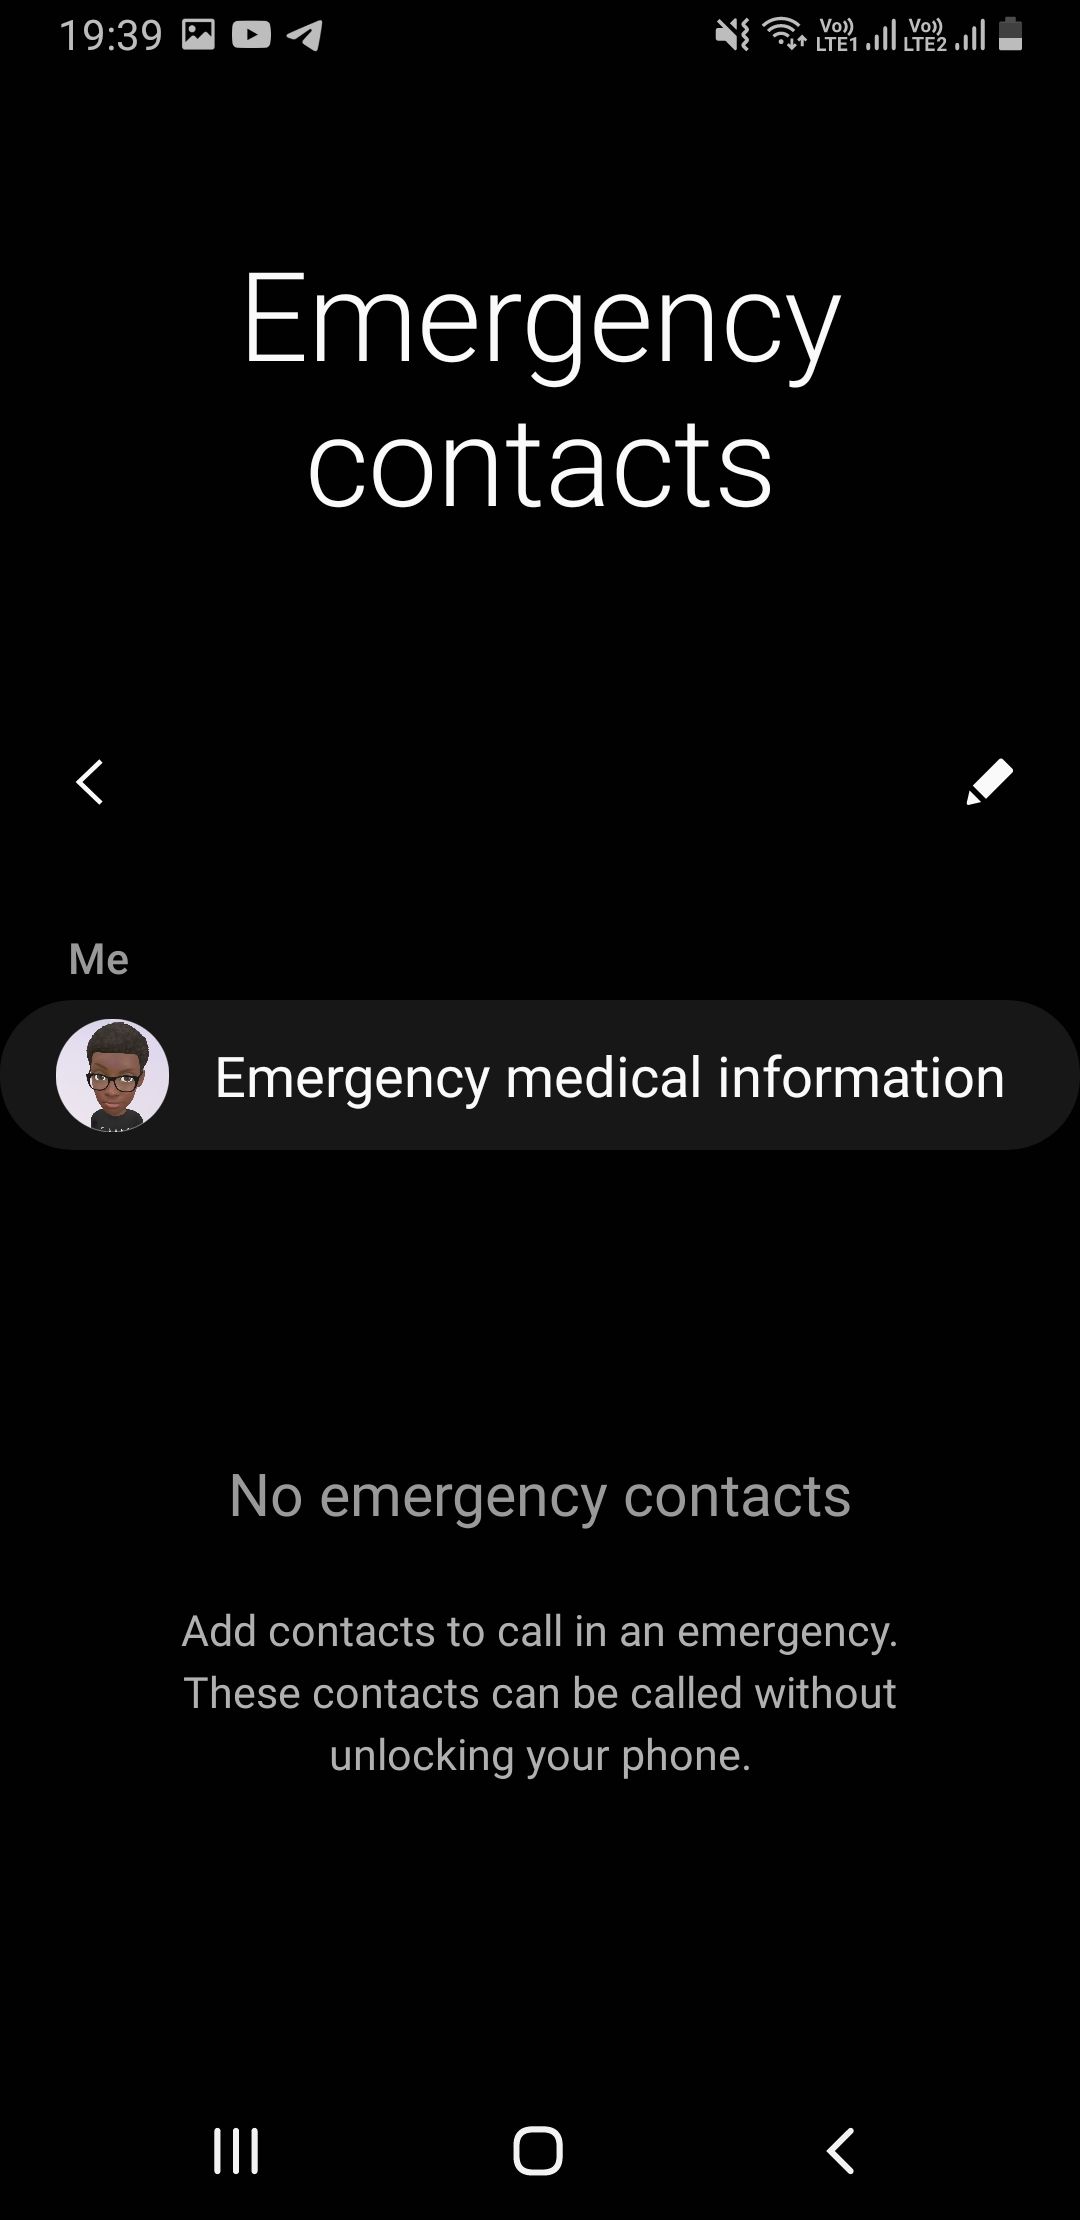 Emergency contacts menu on Samsung phone